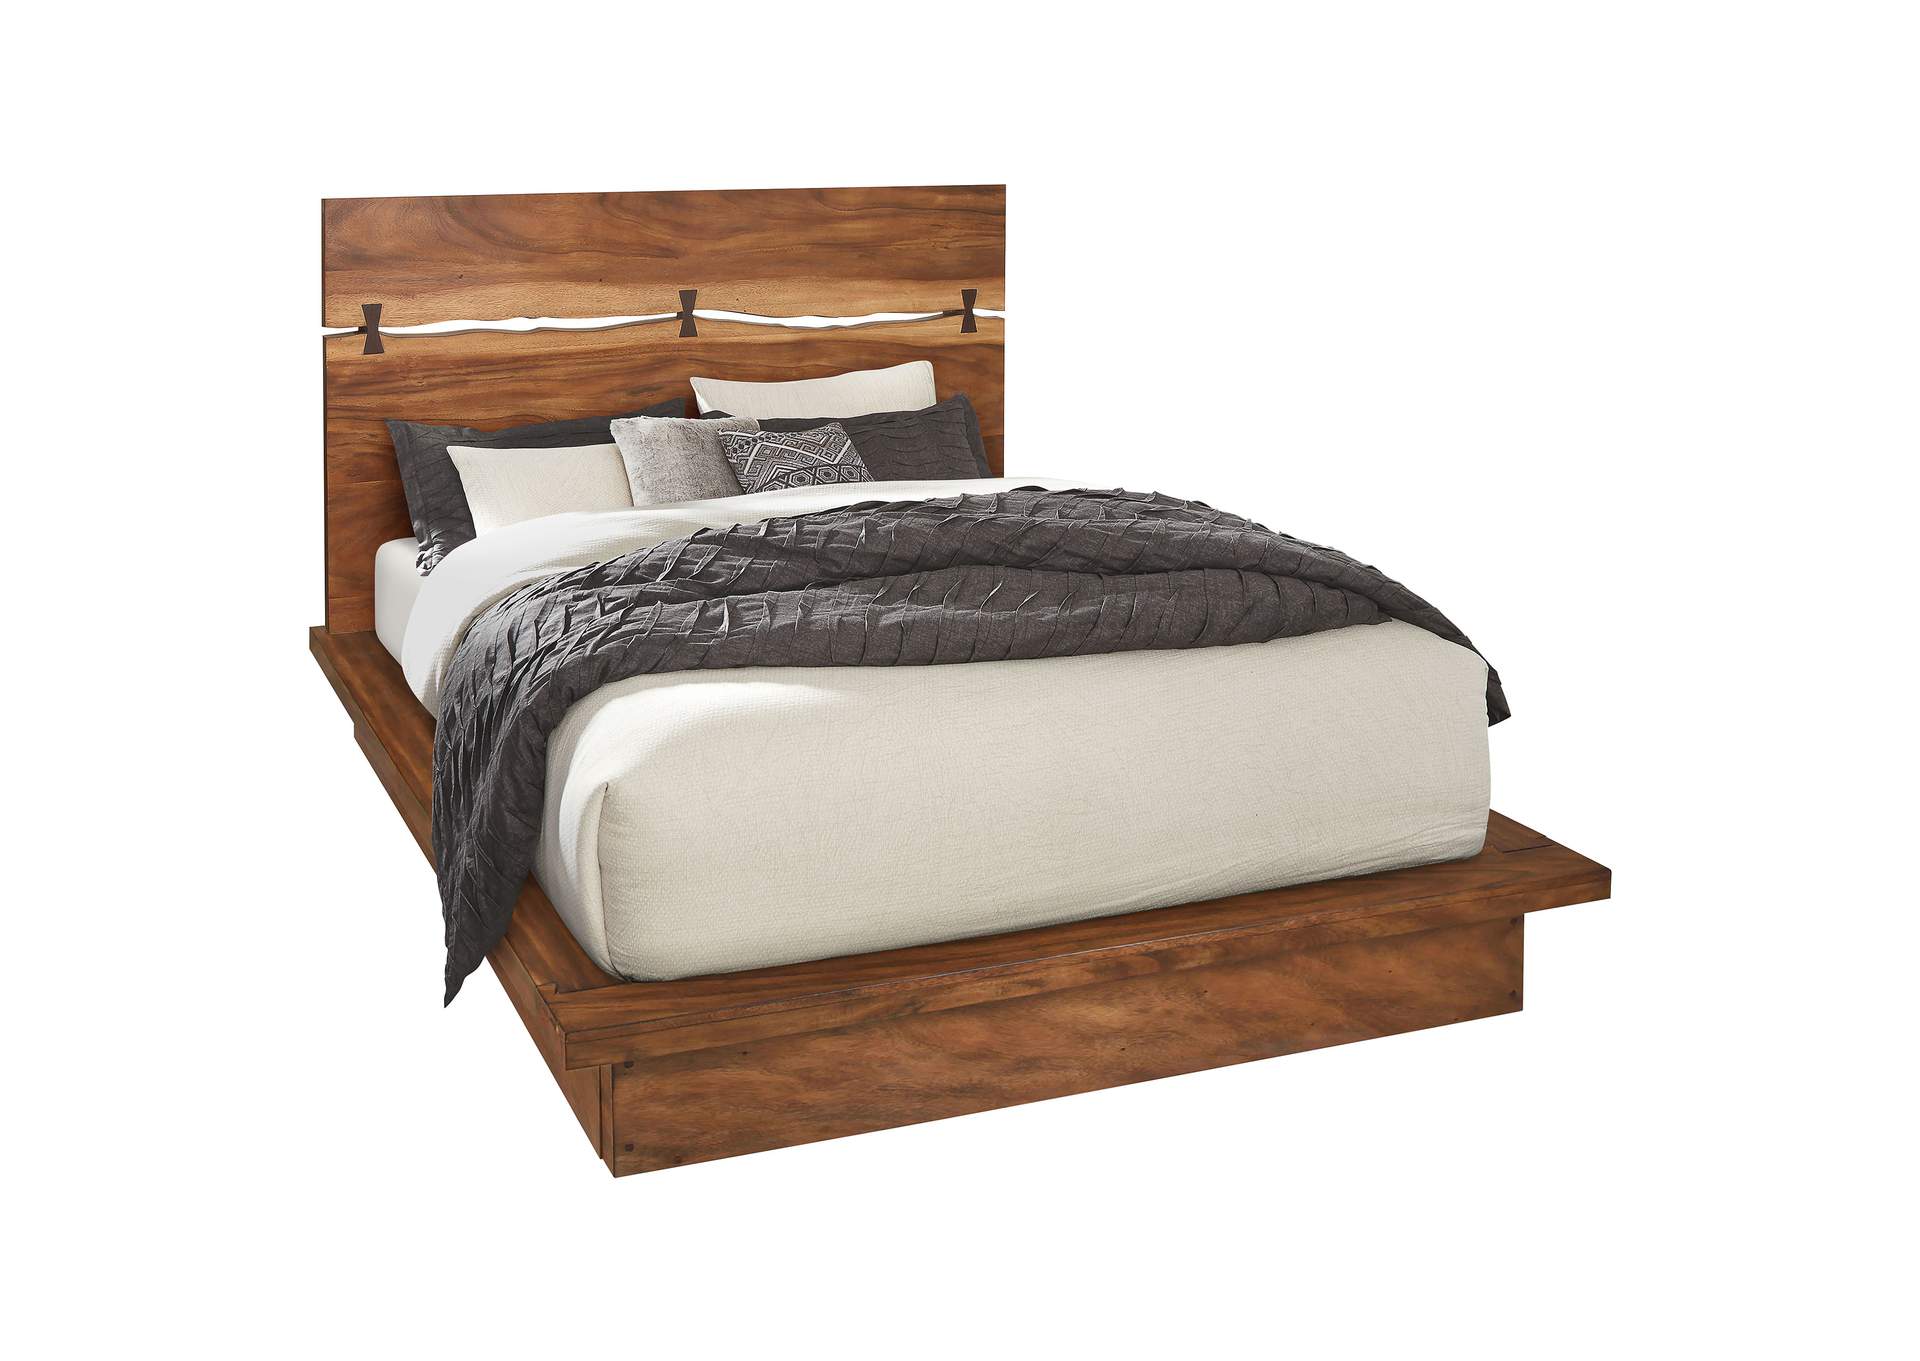 Winslow Queen Bed Smokey Walnut and Coffee Bean,Coaster Furniture